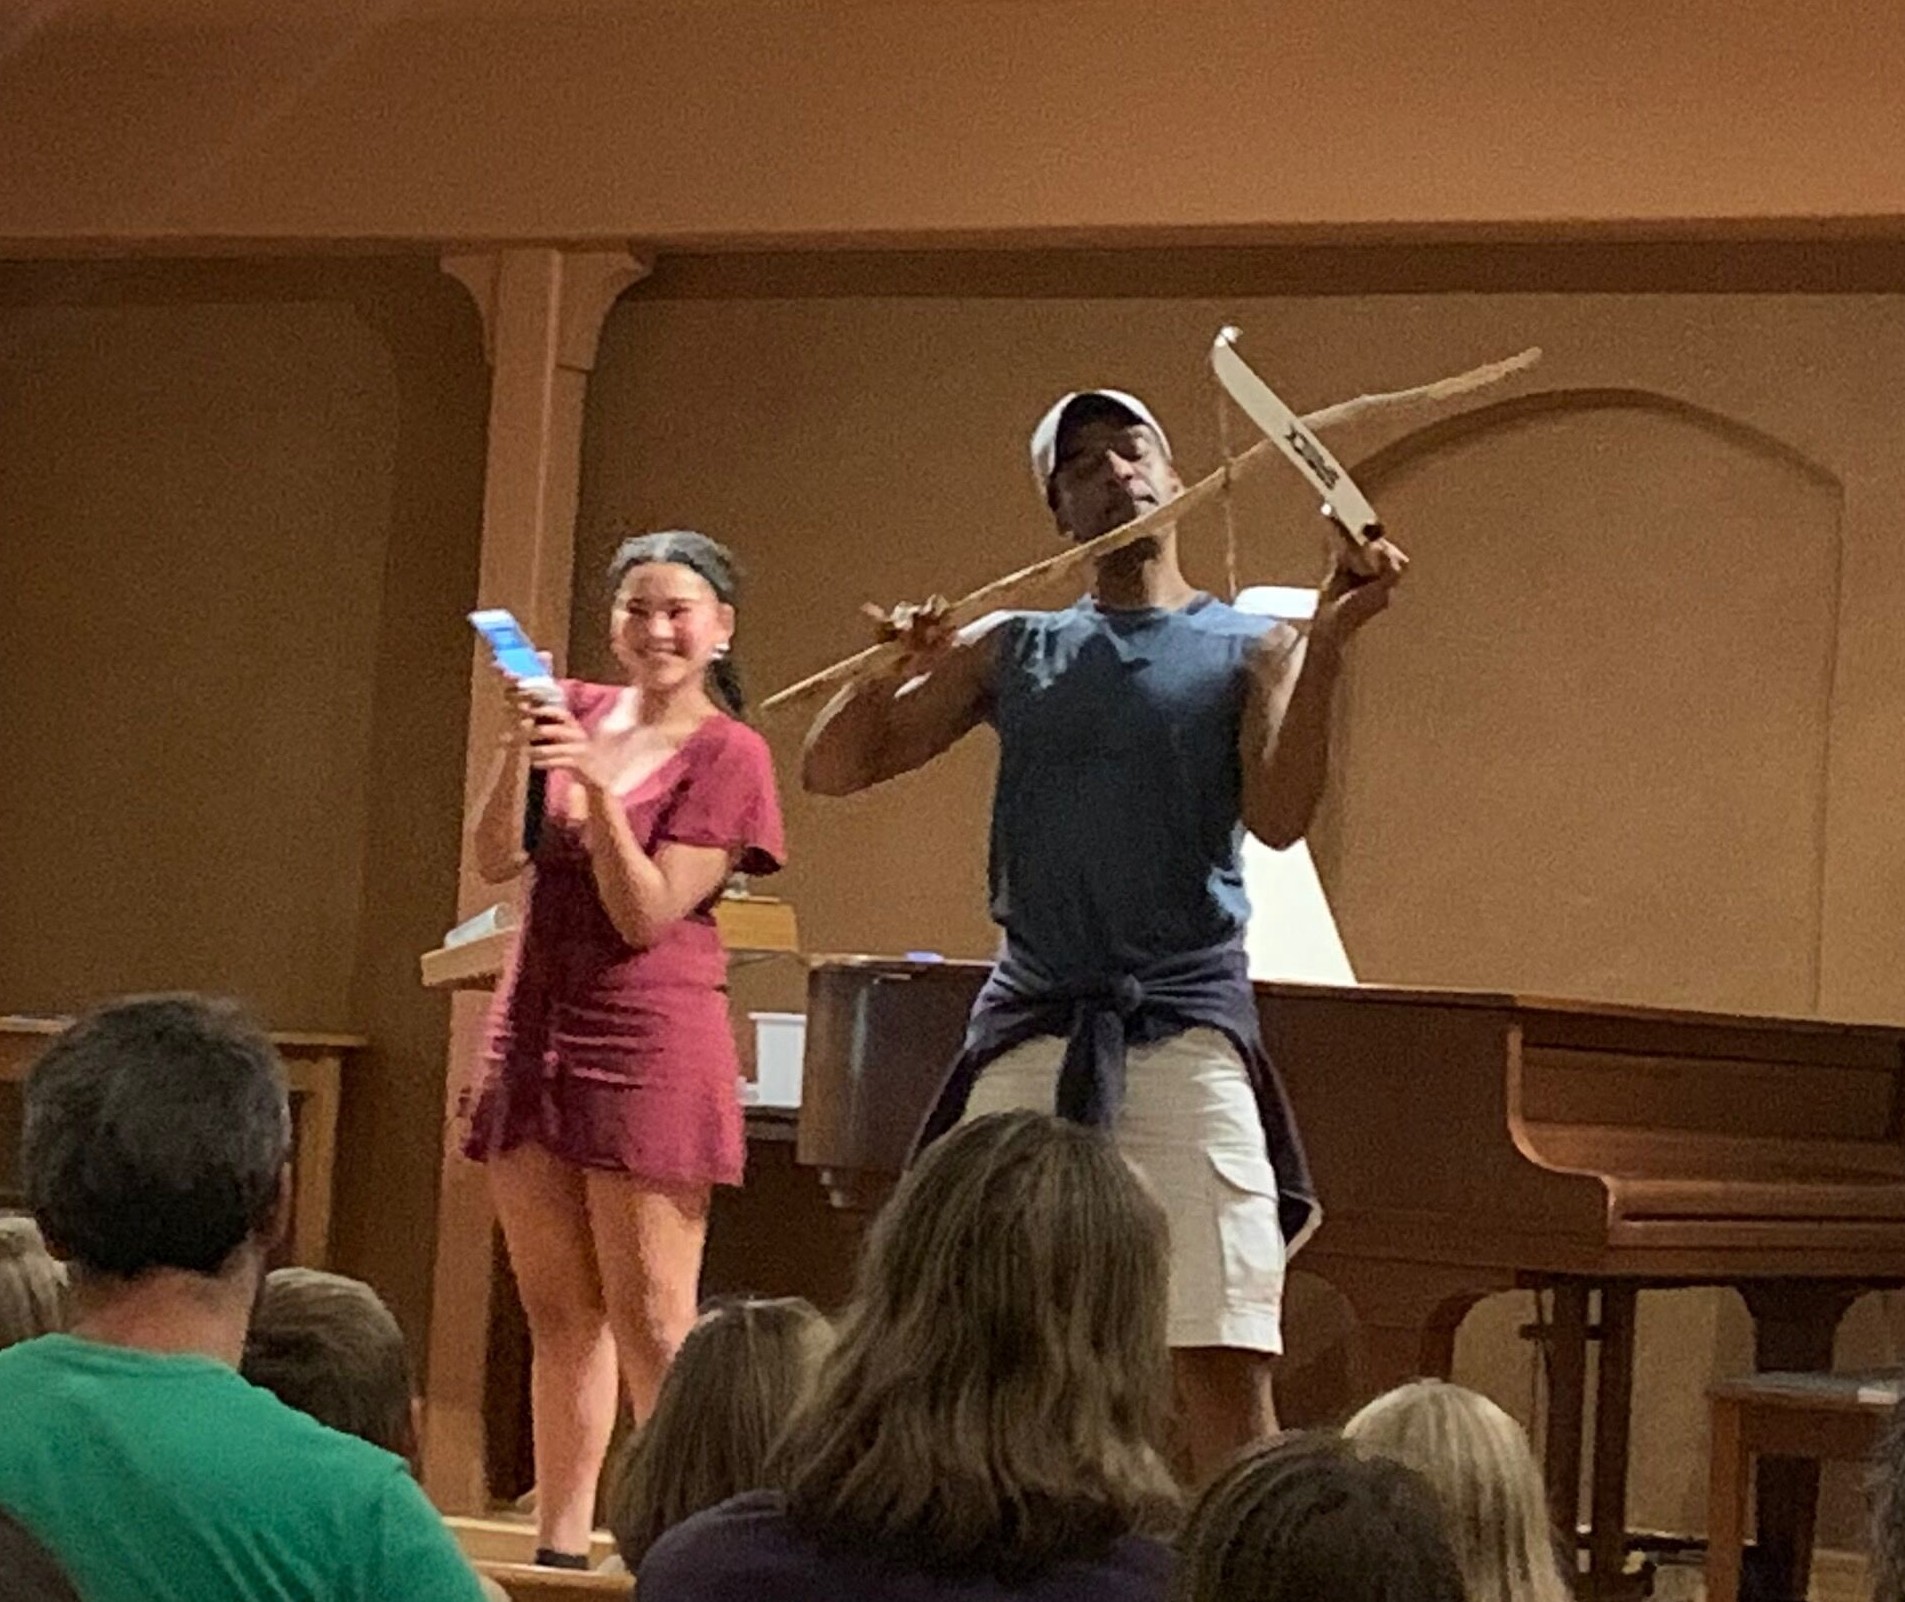 A young woman sings holds up her phone playing music, while her father pretends to play a violin, but its actually a strung bow and walking stick.